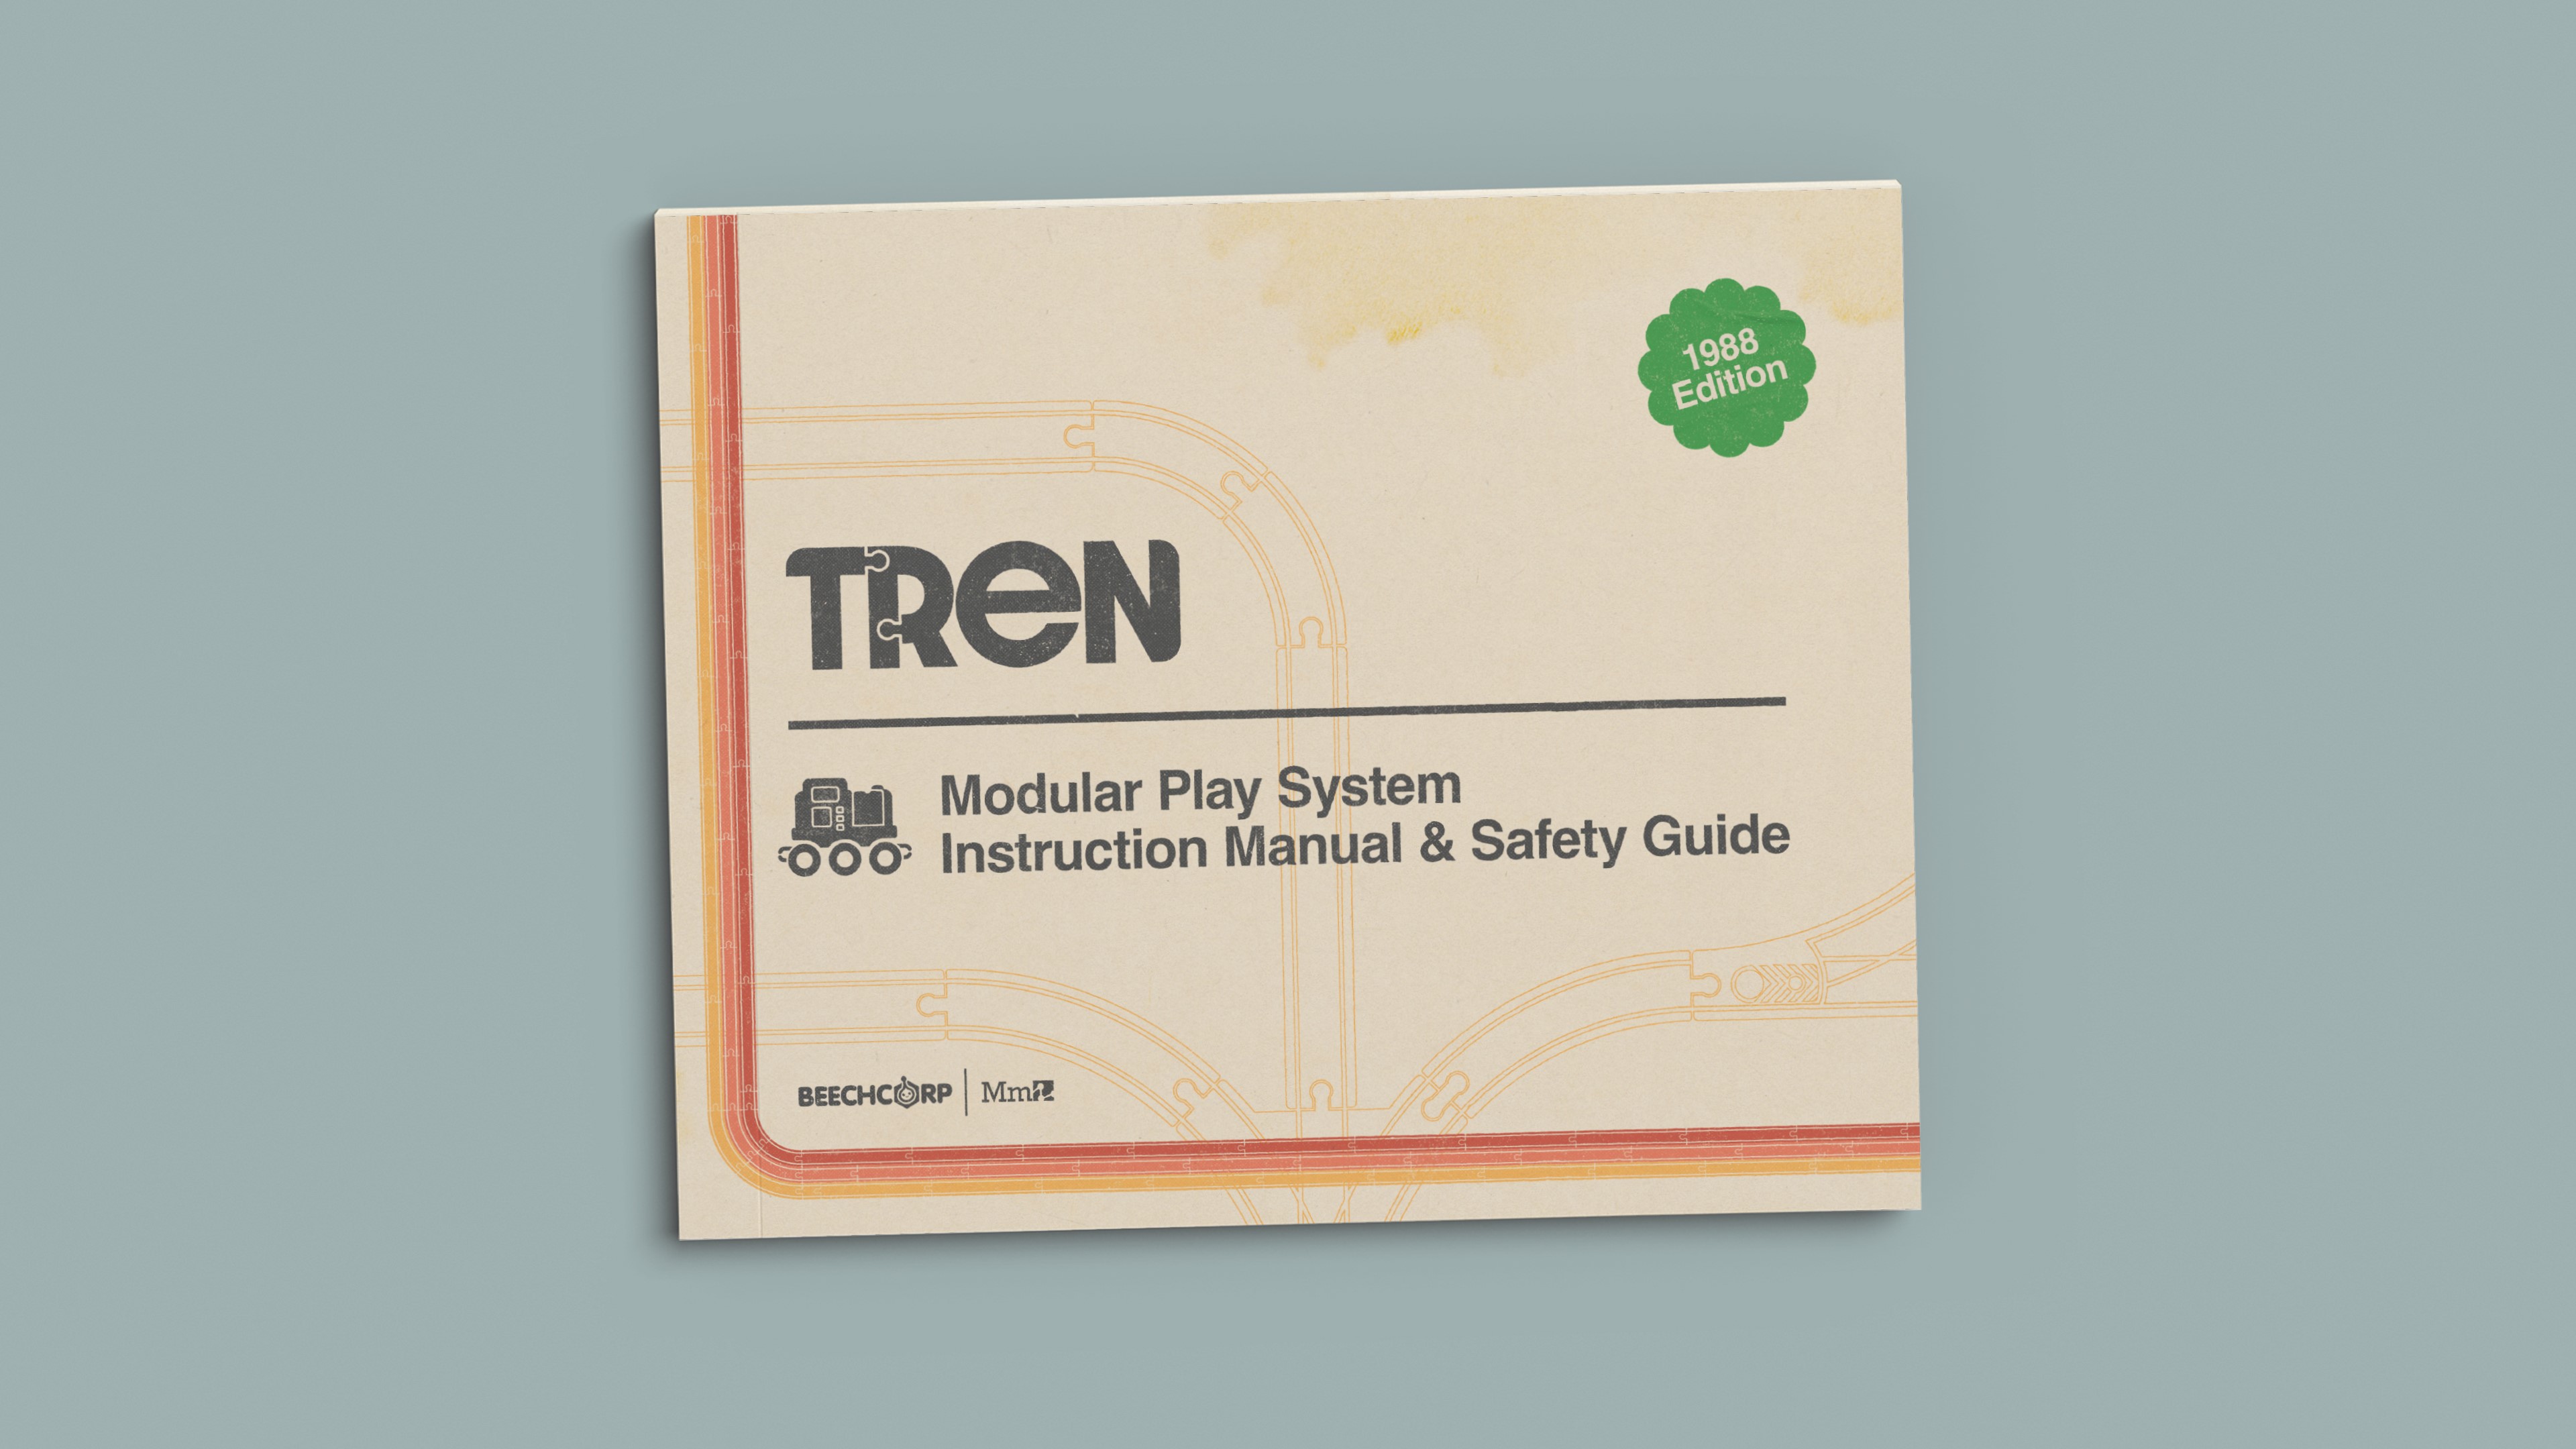 An image of the Tren manual that Jen worked on.